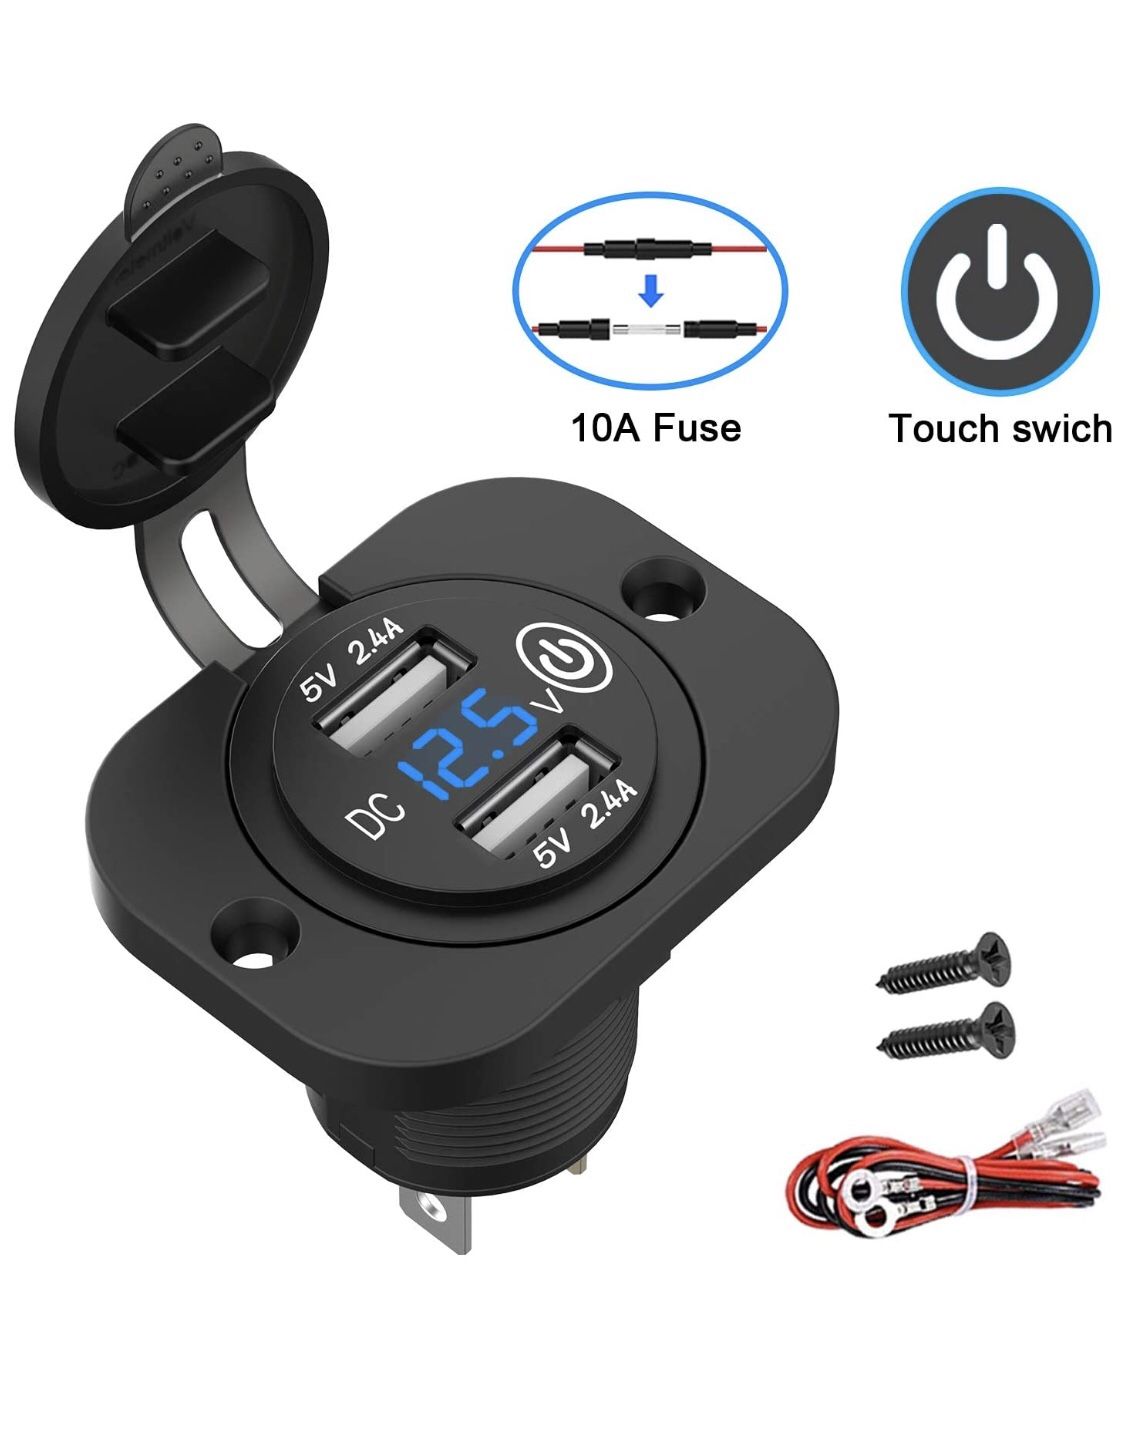 12V/24V USB Socket Outlet with Touch Switch and Digital Voltmeter, Dual 2.4A USB Car Charger with Waterproof Cover and Panel for Motorcycle ATV Campe